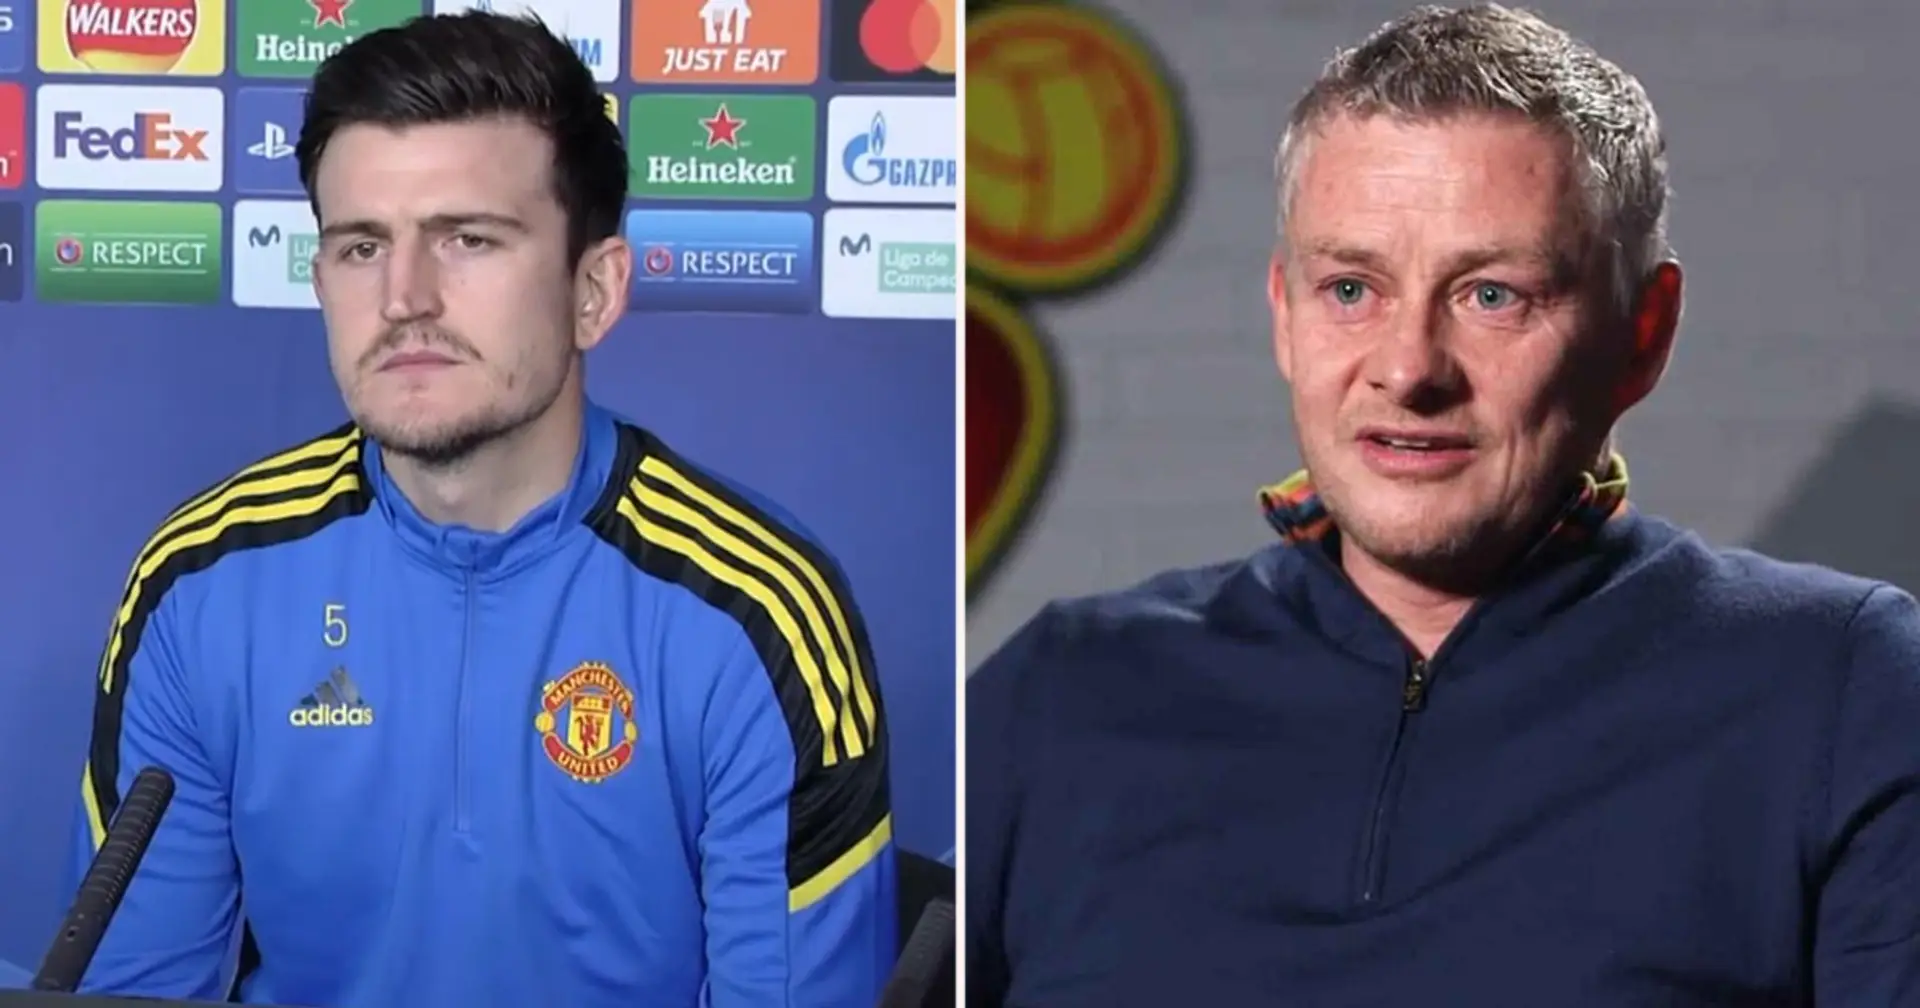 Maguire: 'The players need to take responsibility. Ultimately Ole paid the price for poor performances’